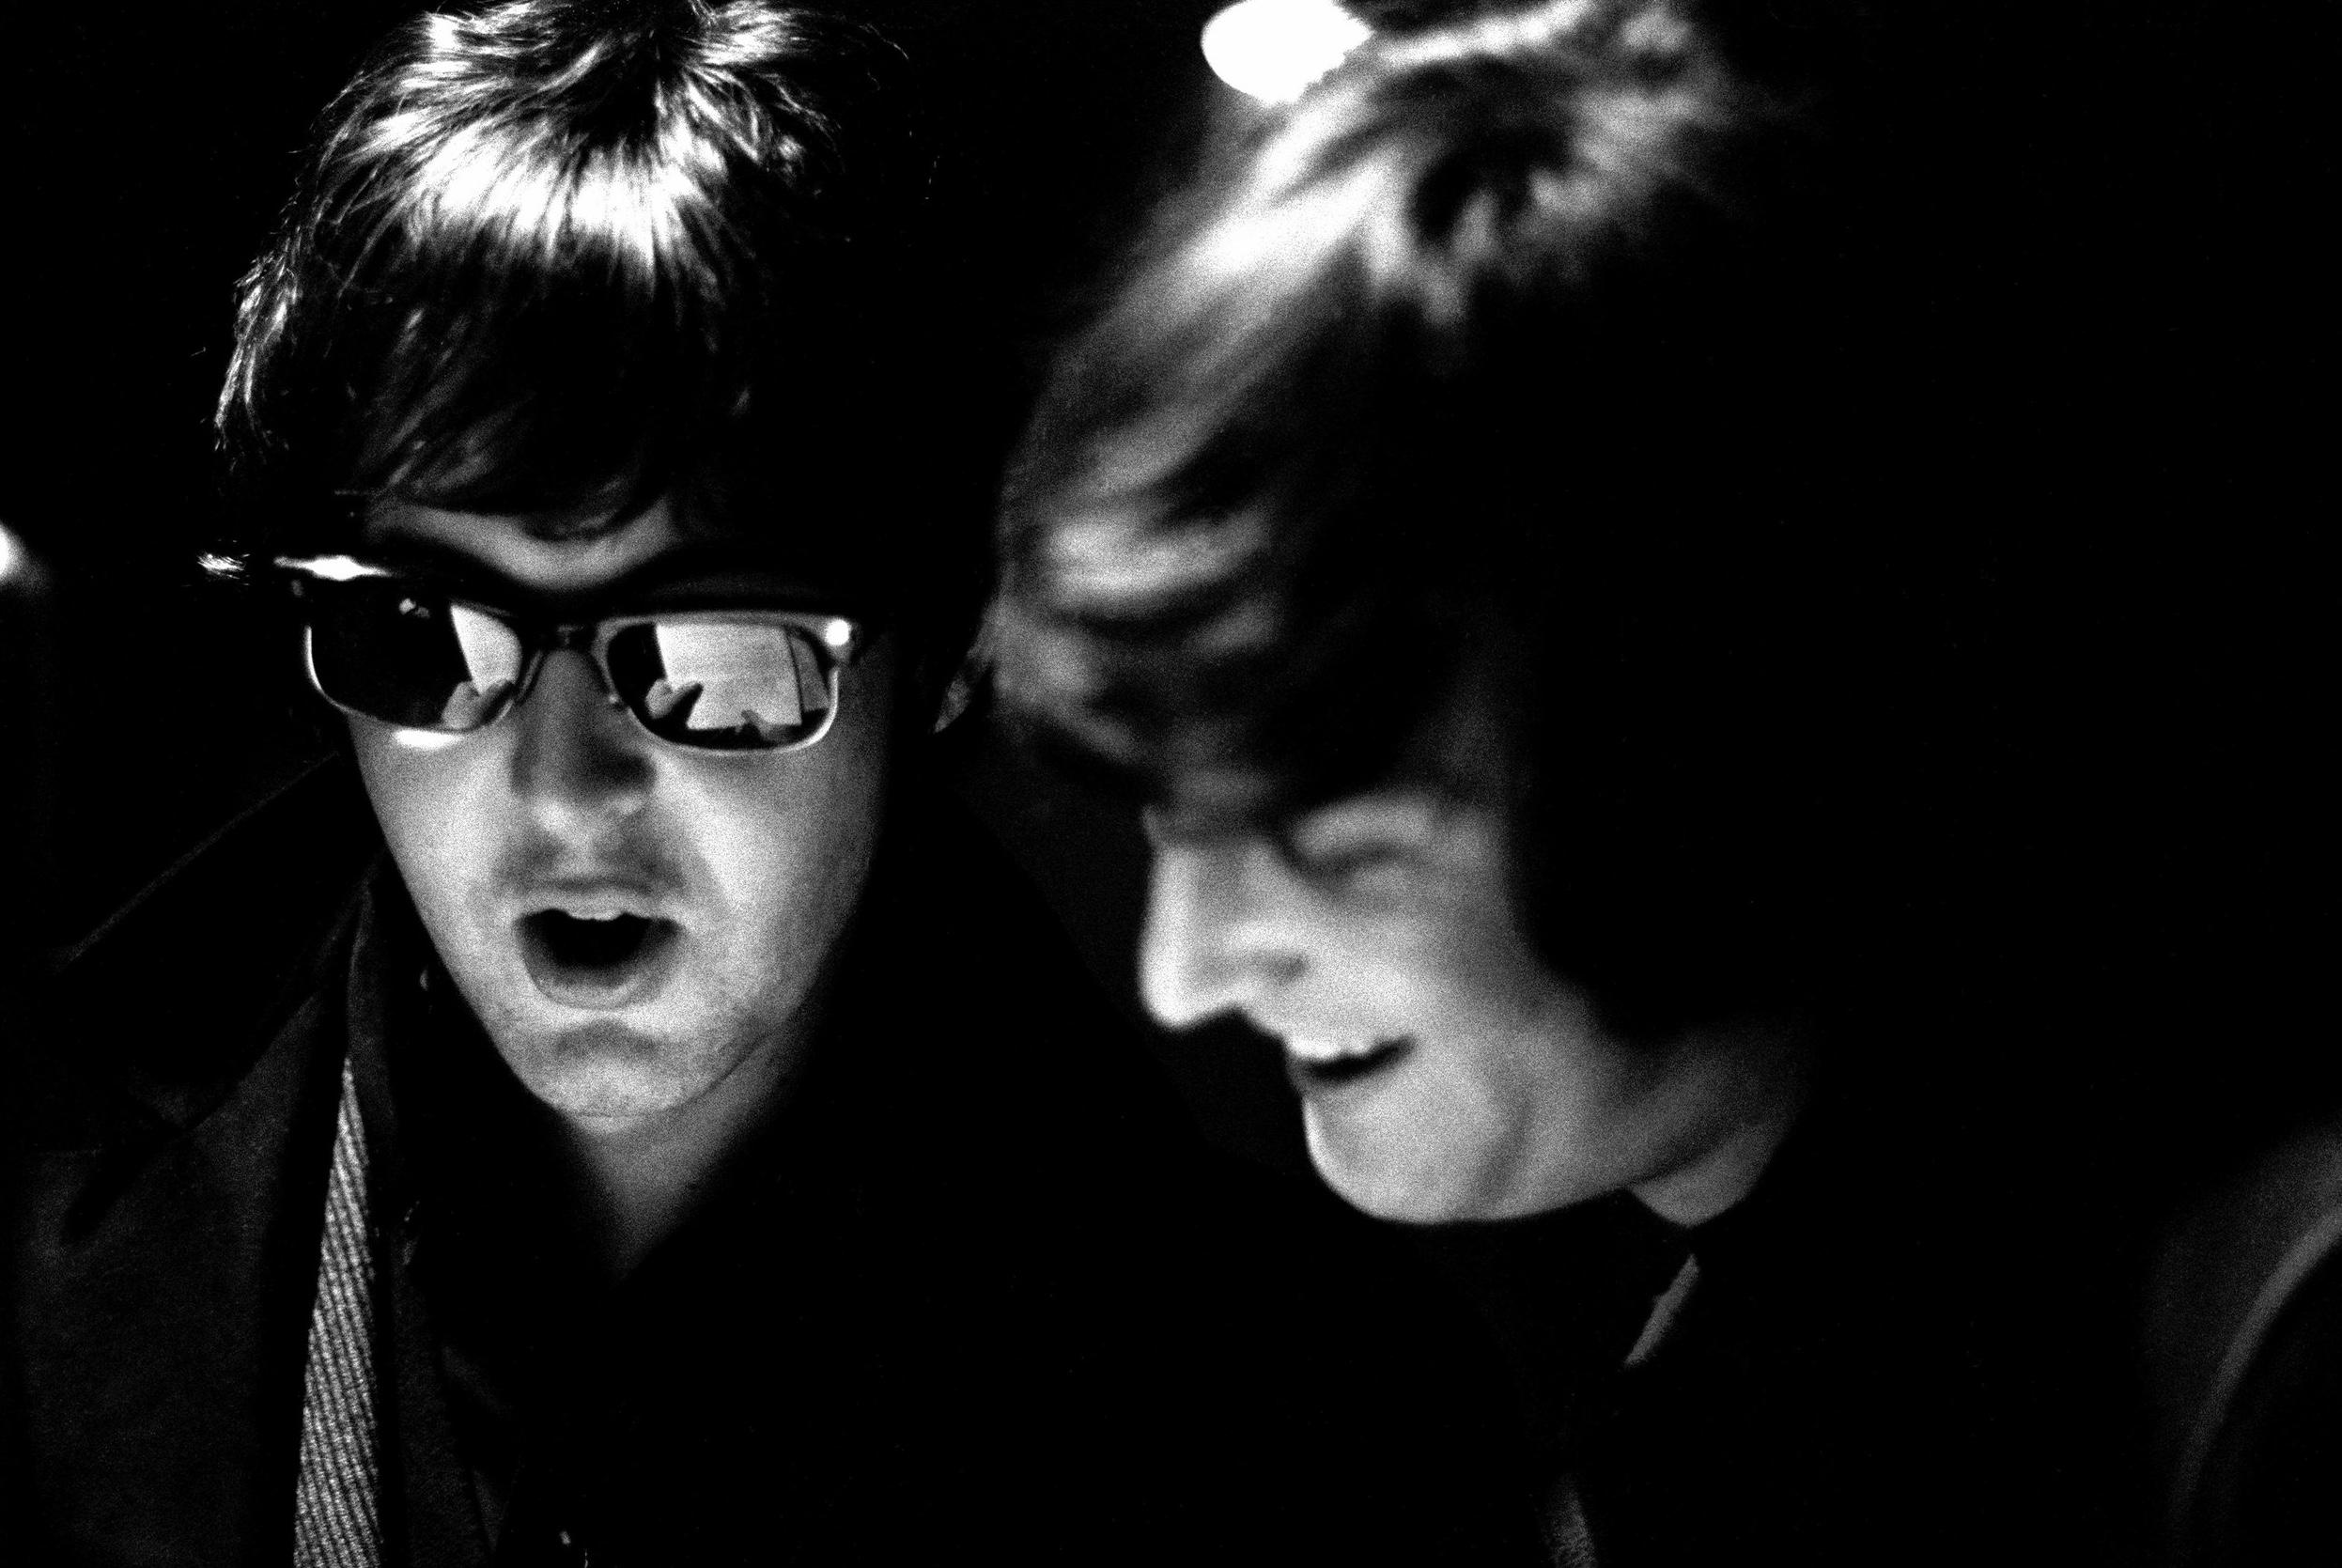 Paul McCartney and John Lennon of The Beatles pictured during the recording of their annual Christmas message to the groups’ fan club at the Marquee Studios in central London, 19th October 1965.

All limited edition prints in this collection are